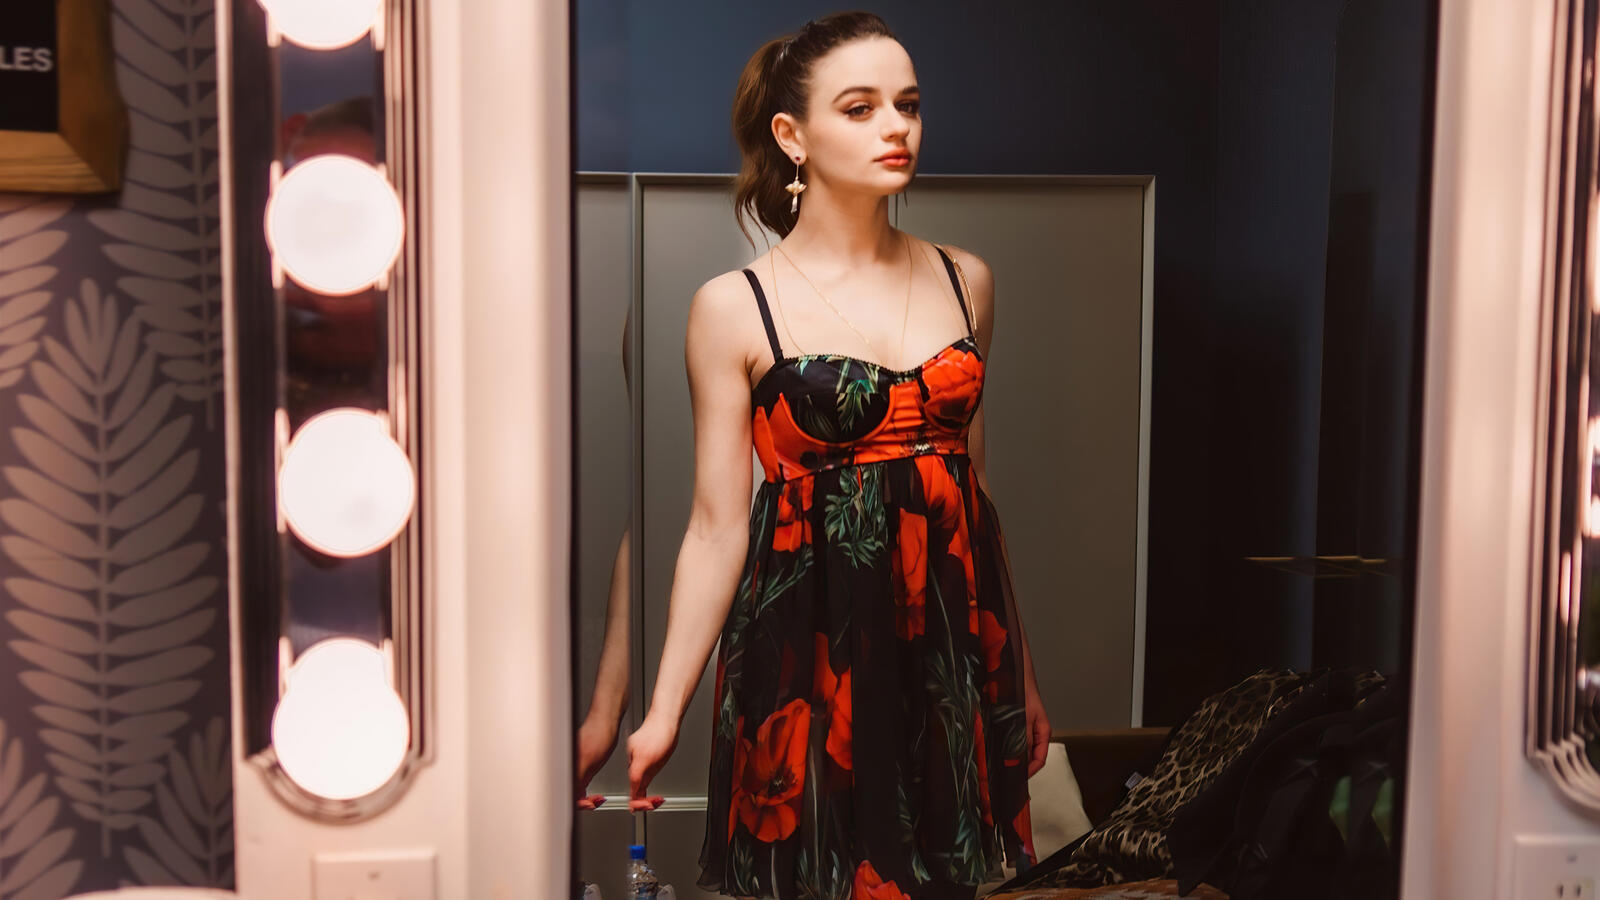 Free photo Joey King in an evening gown